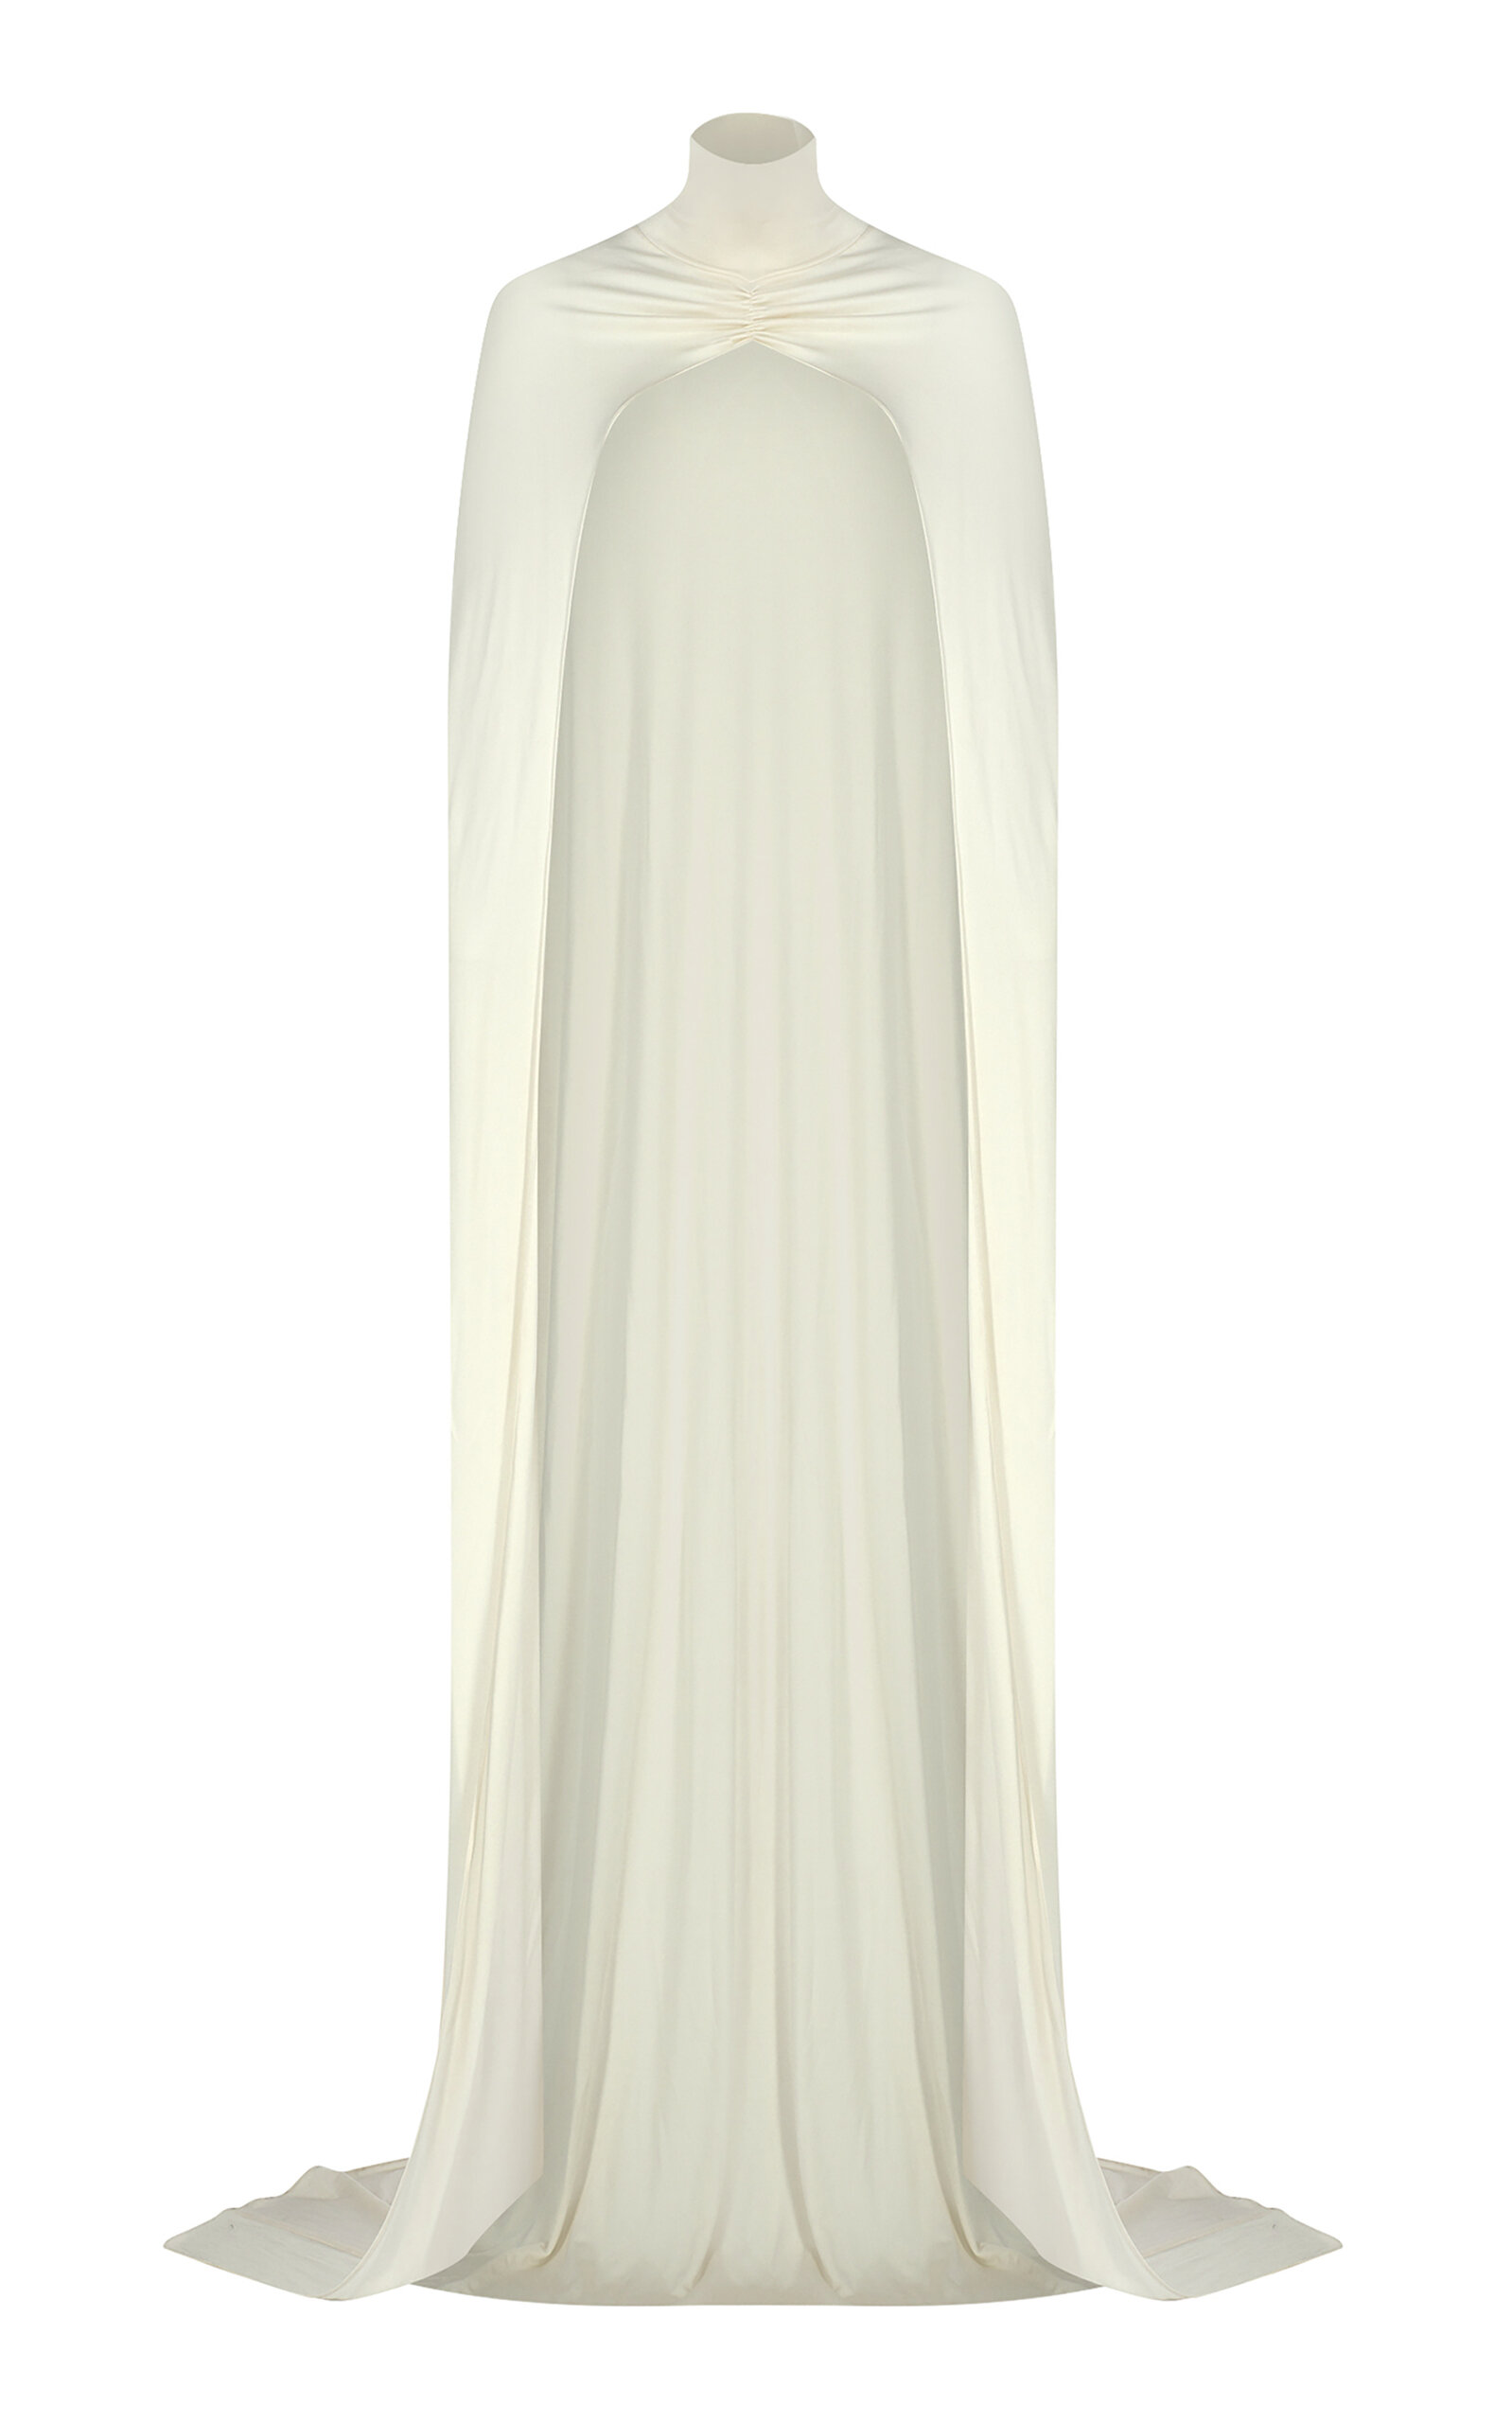 The New Arrivals Ilkyaz Ozel Leia Jersey Cape In White